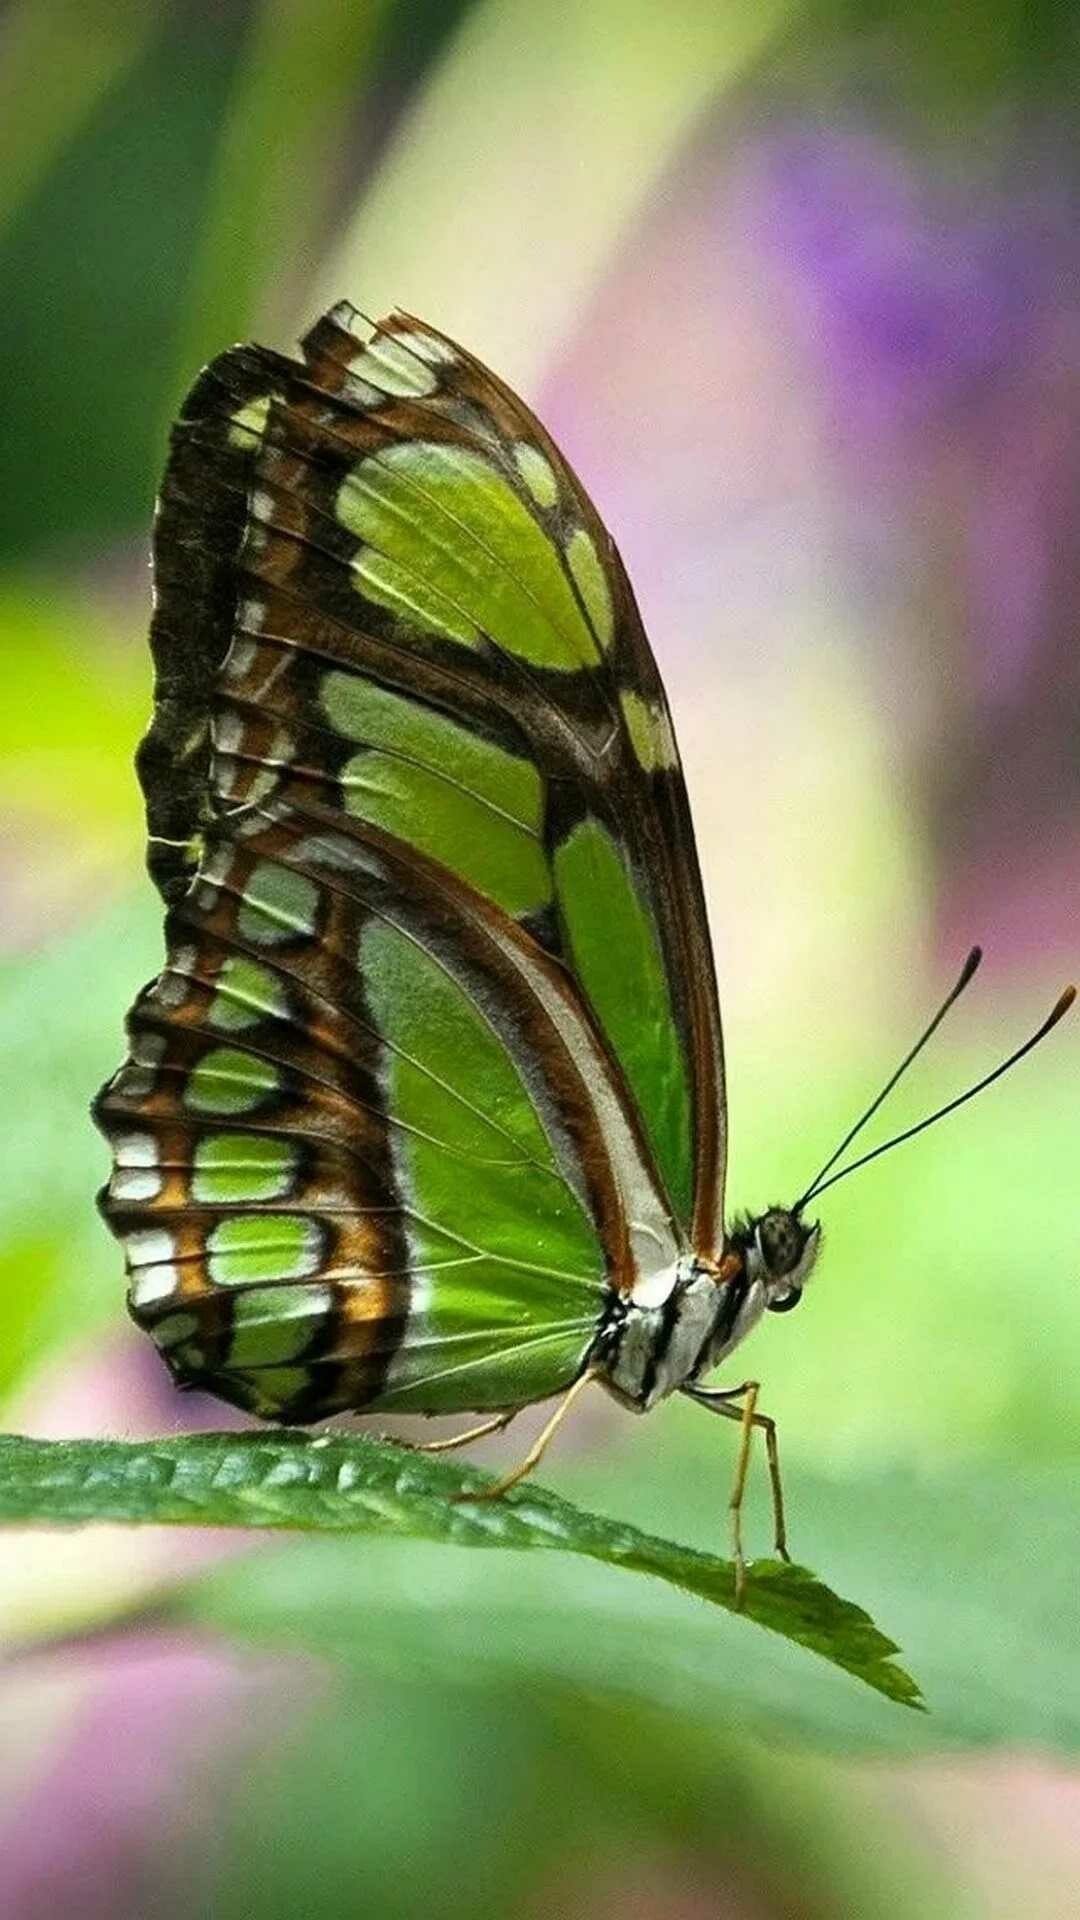 Butterfly: Butterflies use their antennae to sense the air for wind and scents. 1080x1920 Full HD Wallpaper.